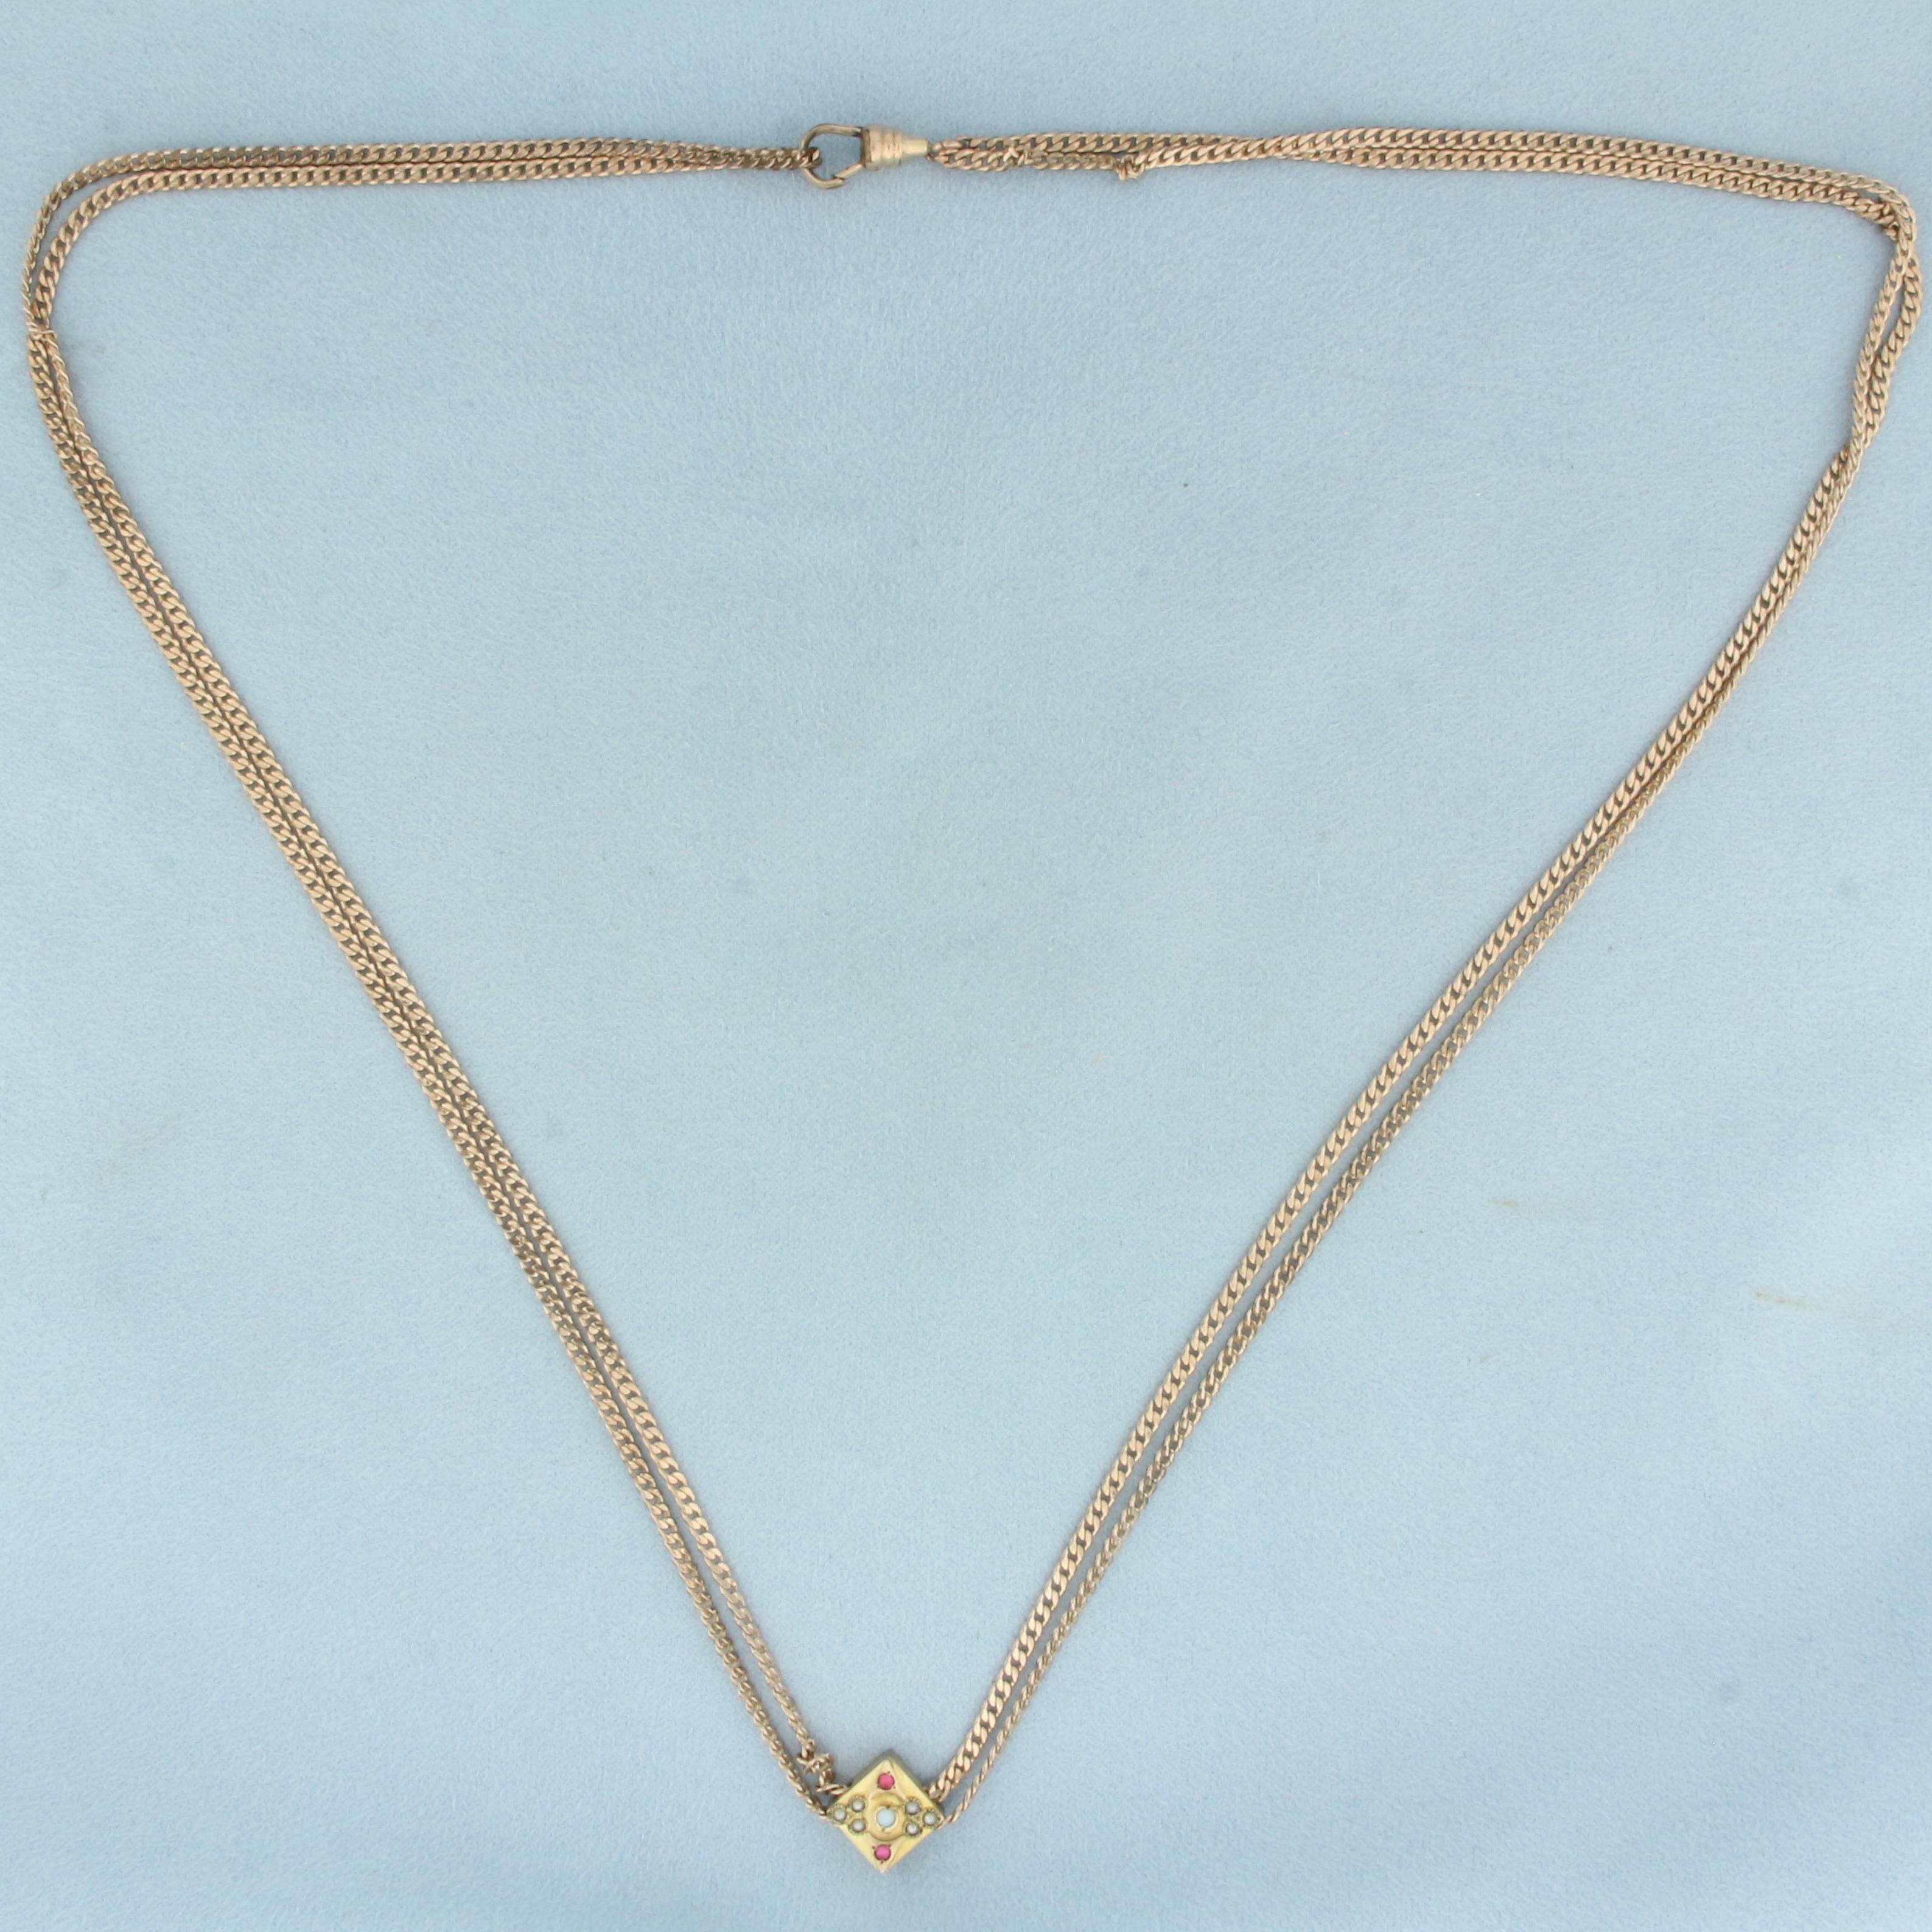 Antique Victorian Opal Ruby Seed Pearl Guard Chain Necklace